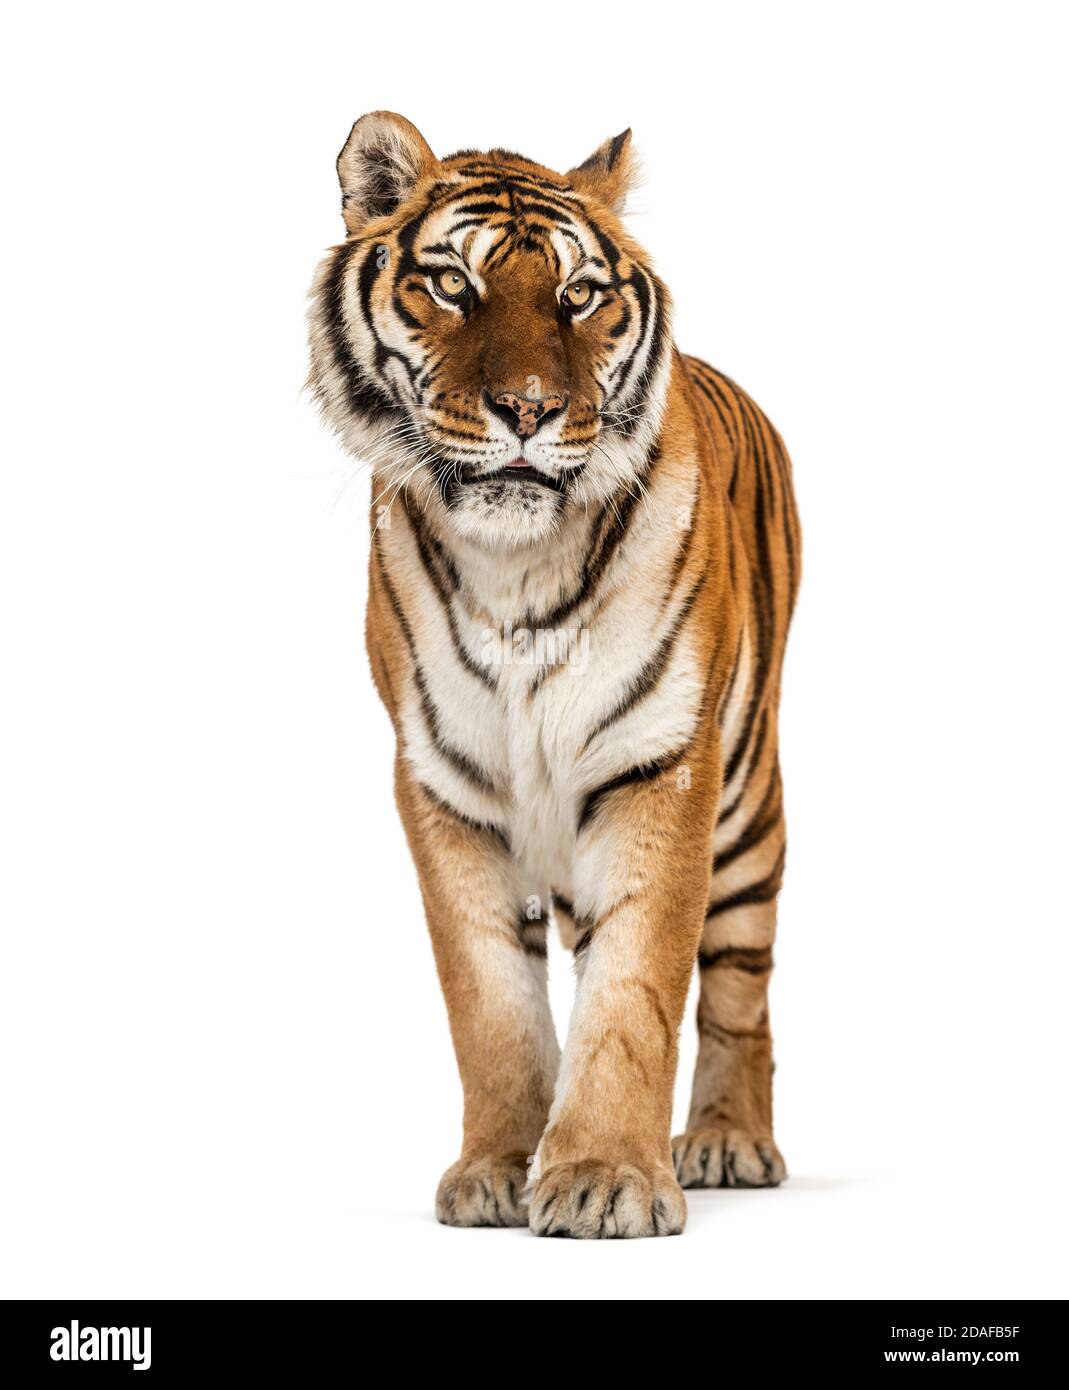 Tiger standing on a white background Stock Photo - Alamy